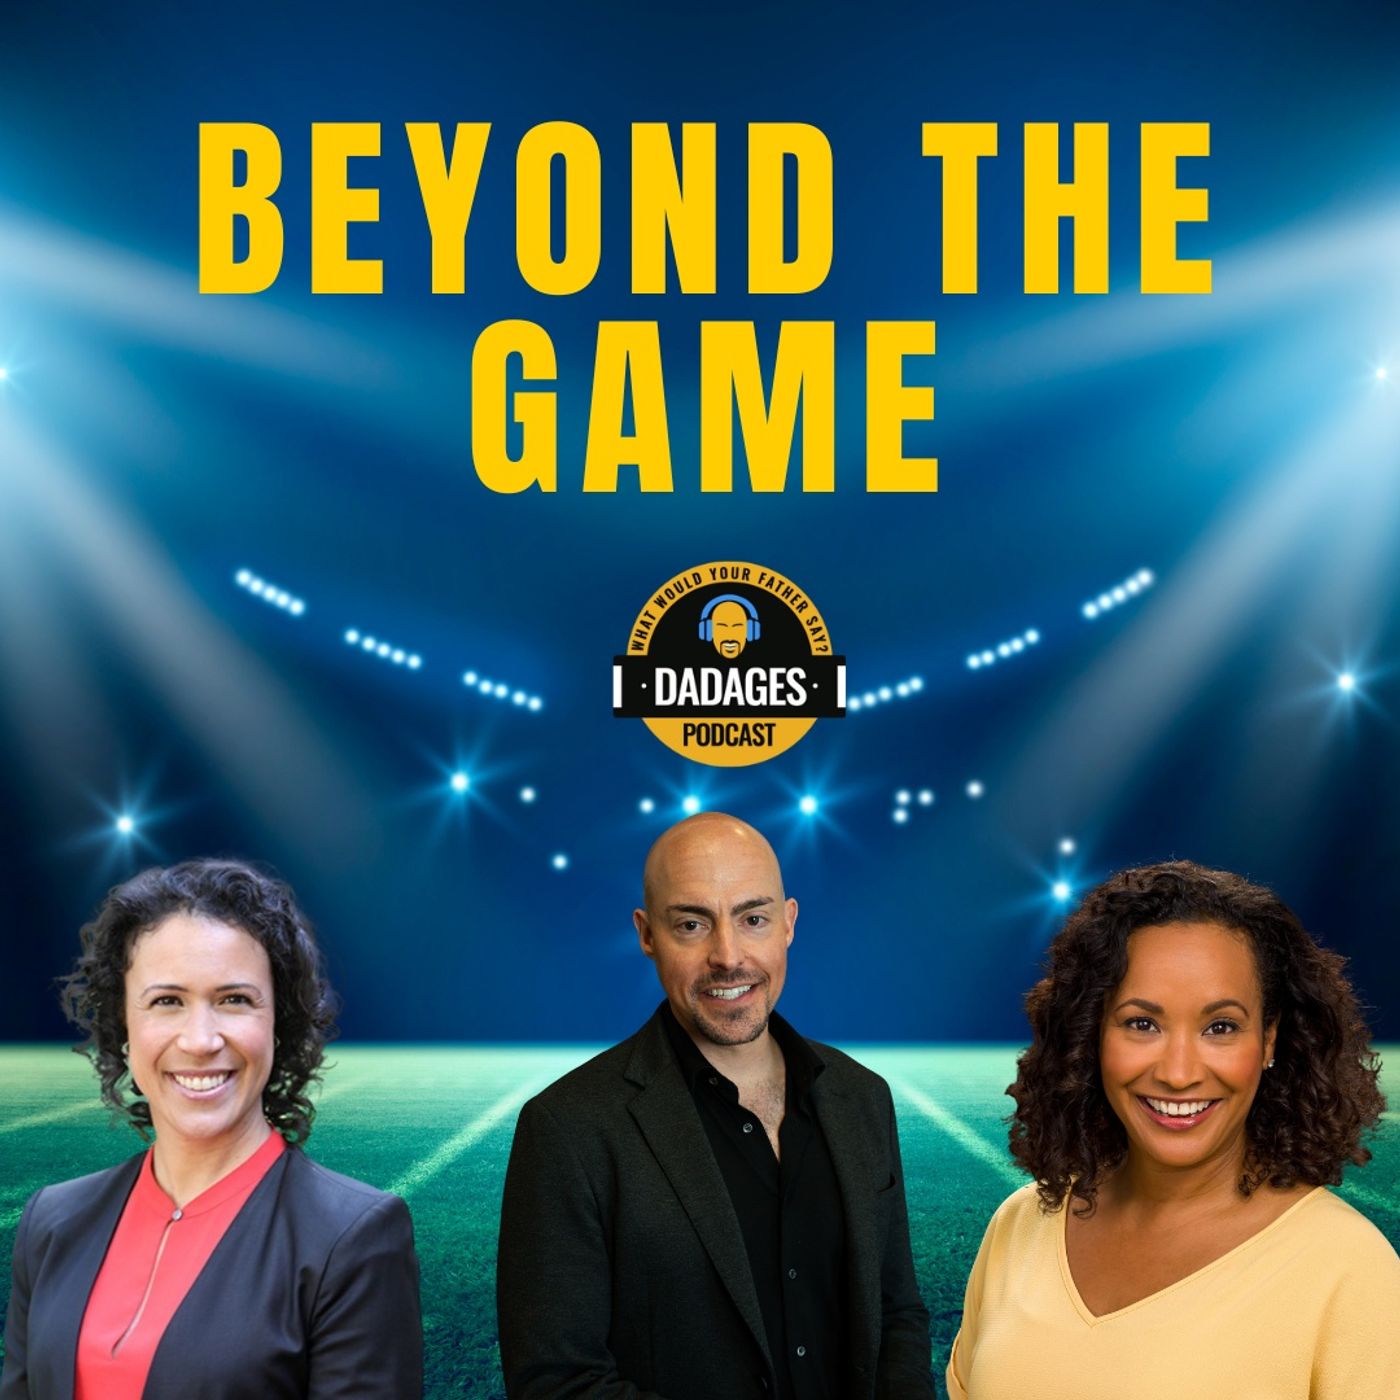 Beyond the Game: Pioneers of Progress in Sports